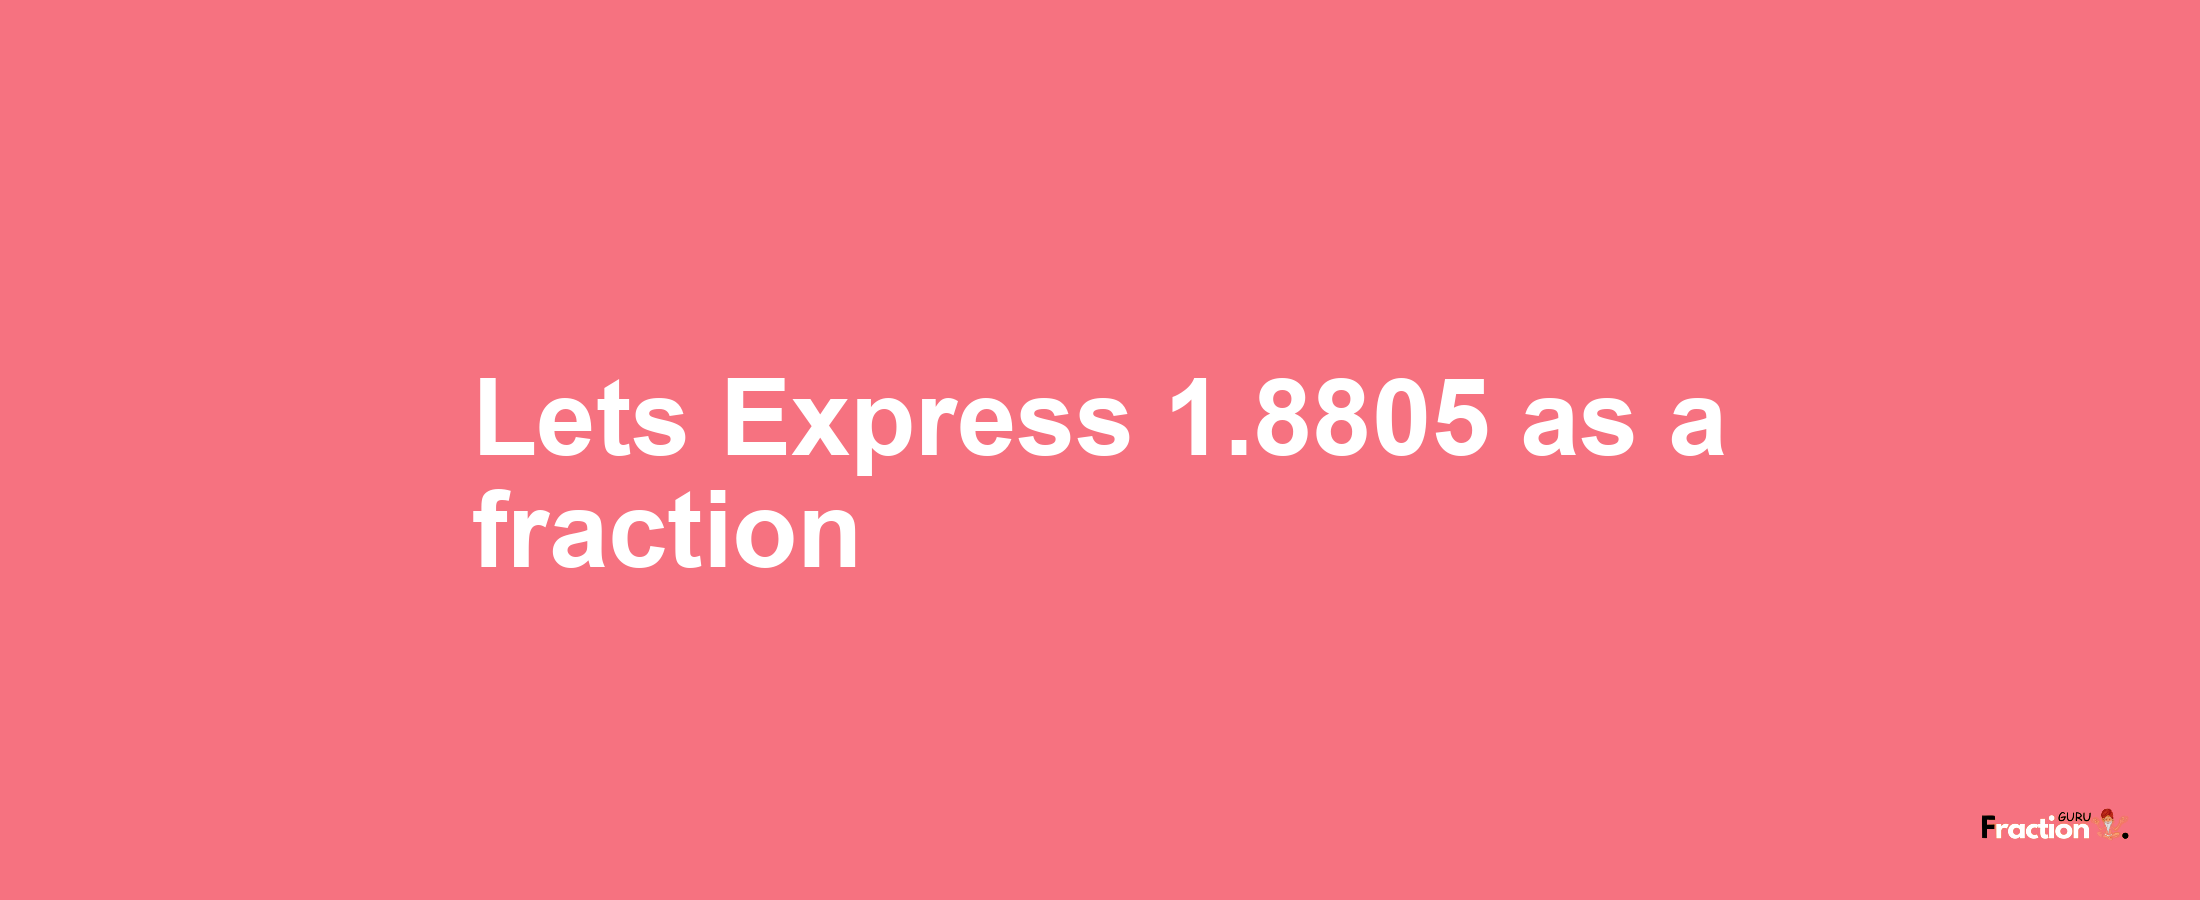 Lets Express 1.8805 as afraction